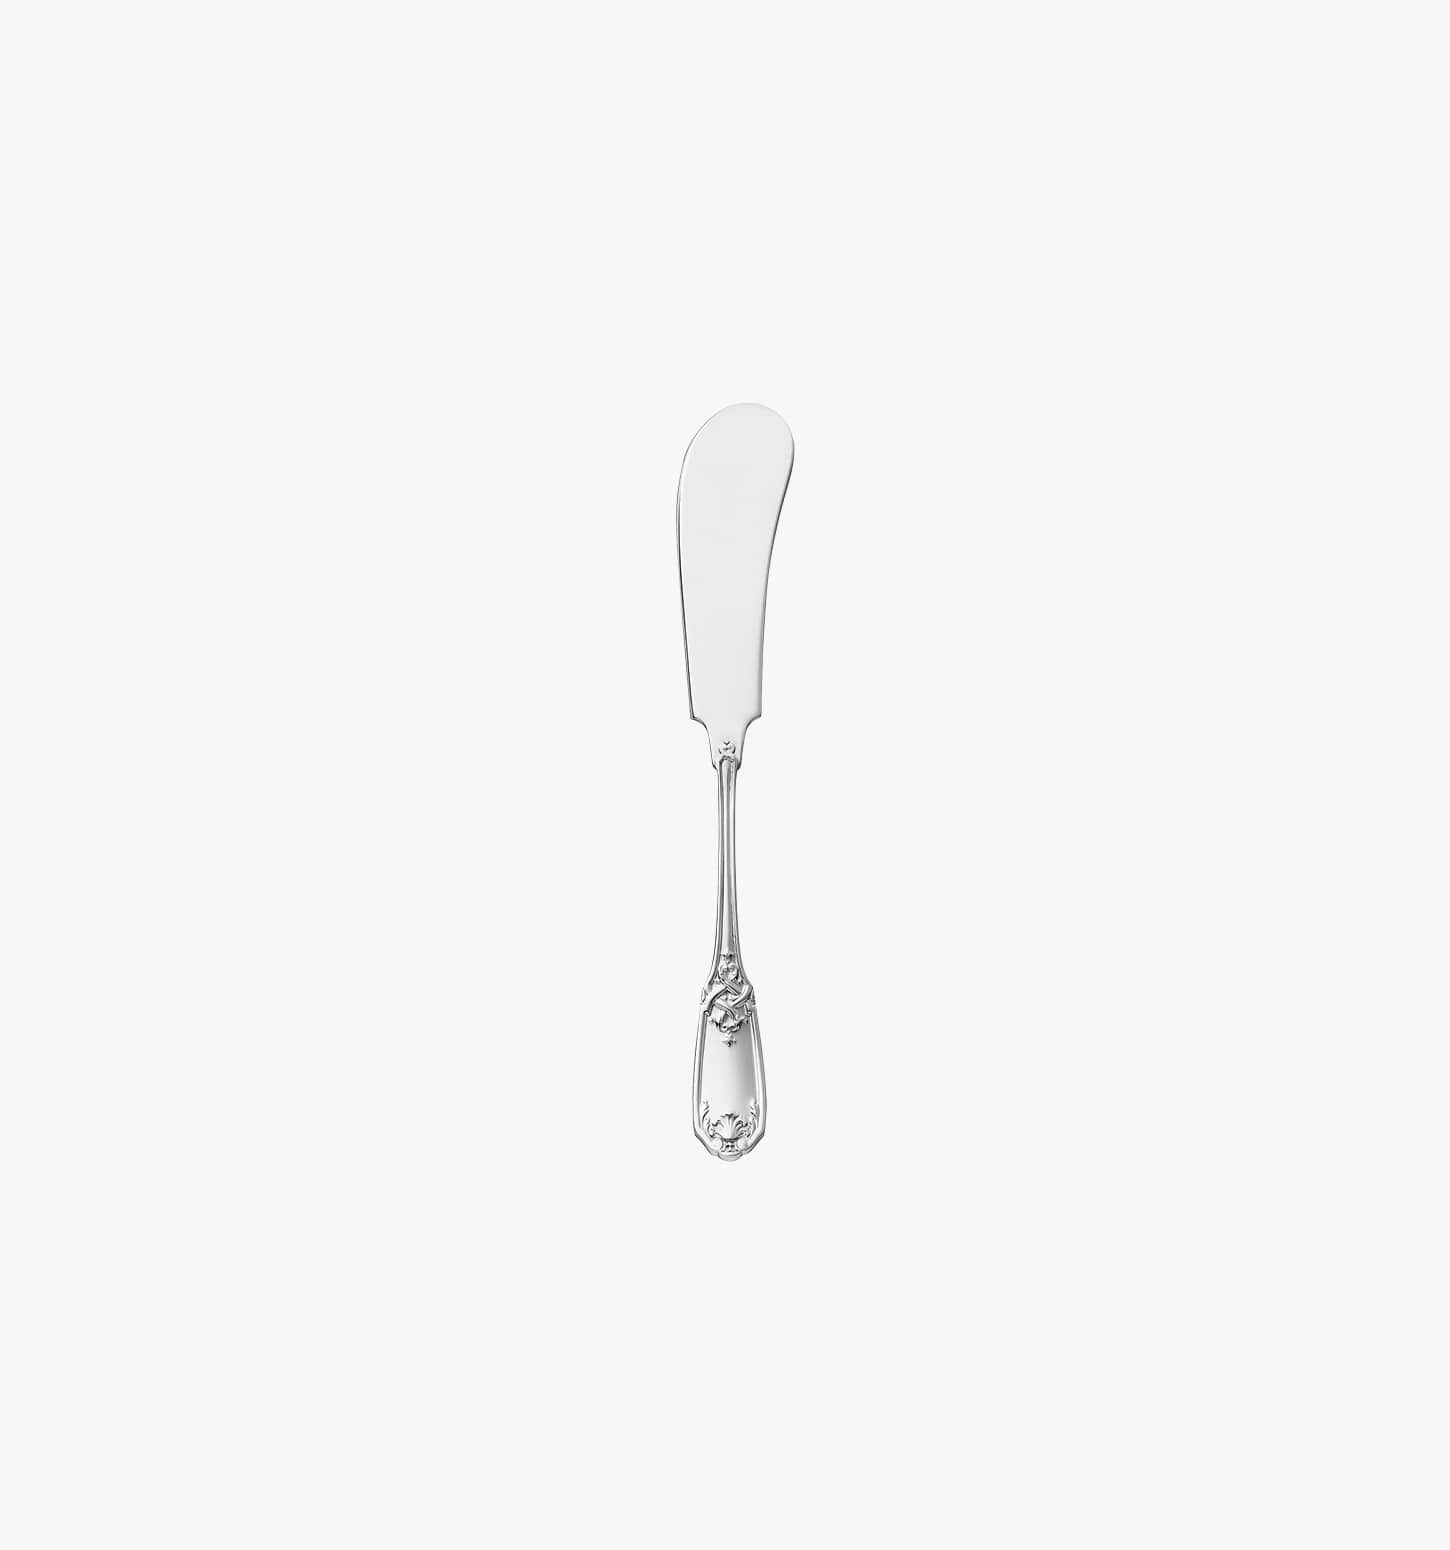 Butter knife in sterling silver from Molière Mascaron collection from Puiforcat